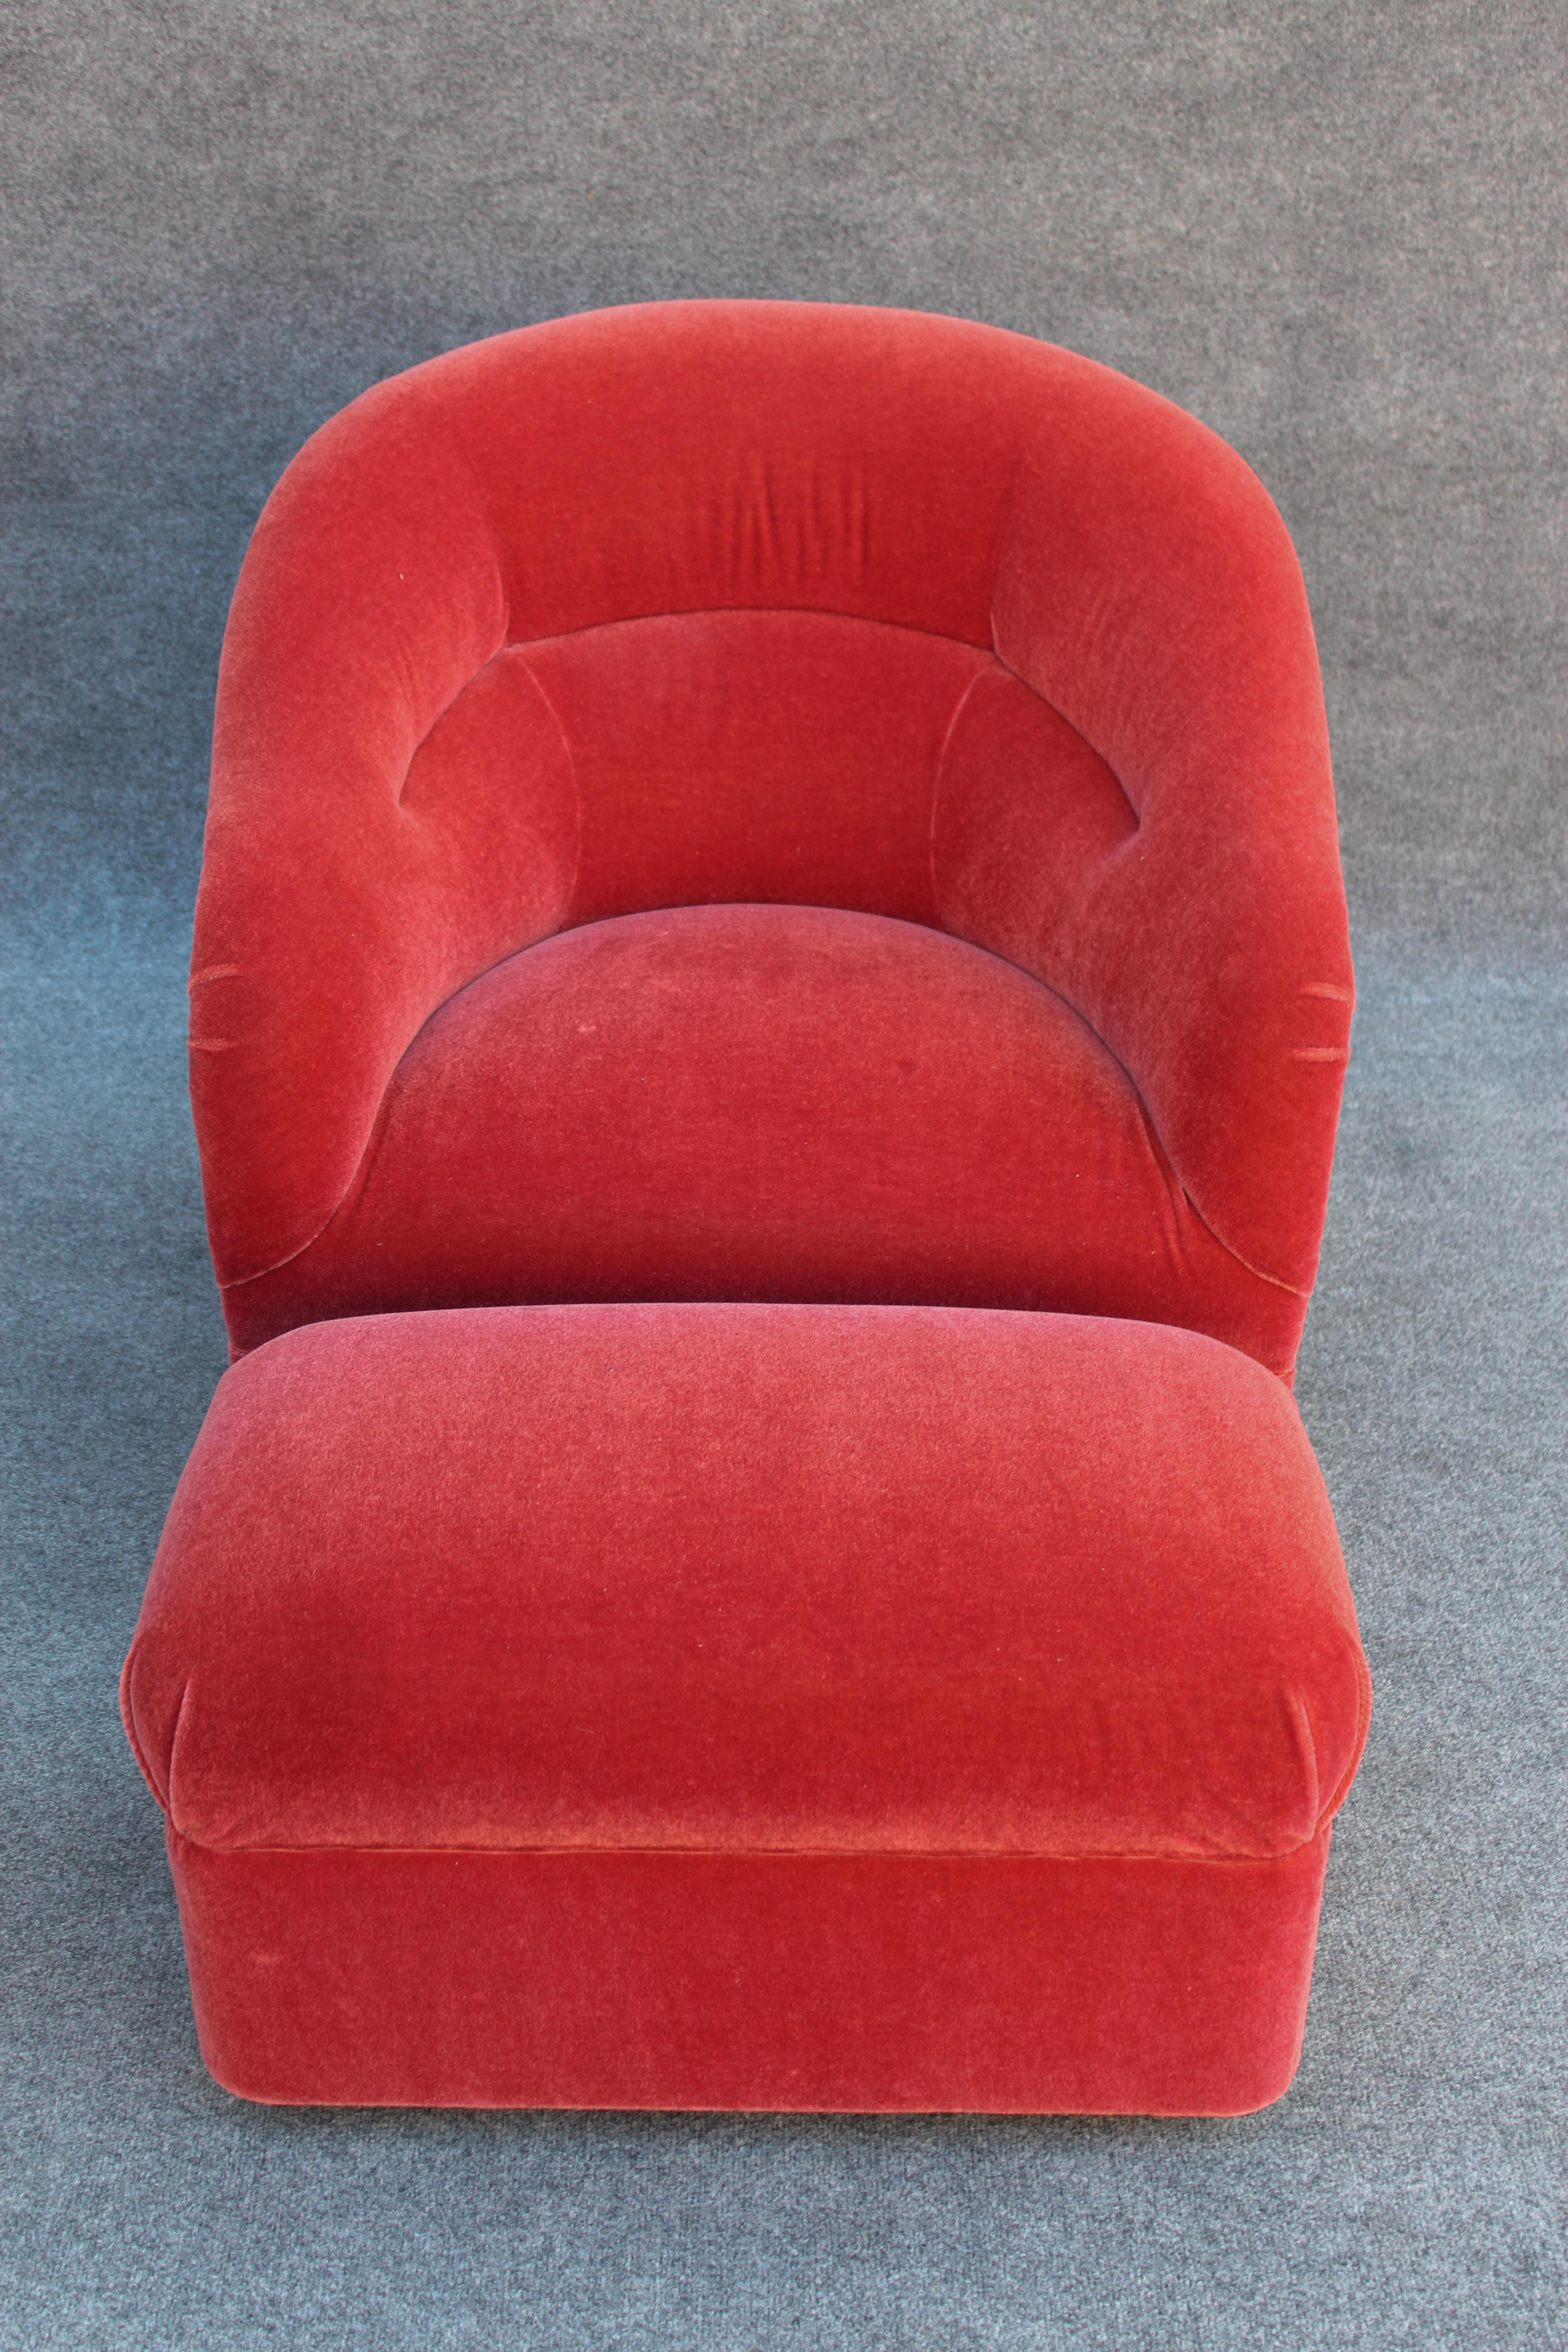 American Ward Bennett Brickel Red Mohair Upholstered Swivel Tub Lounge Chair With Ottoman For Sale